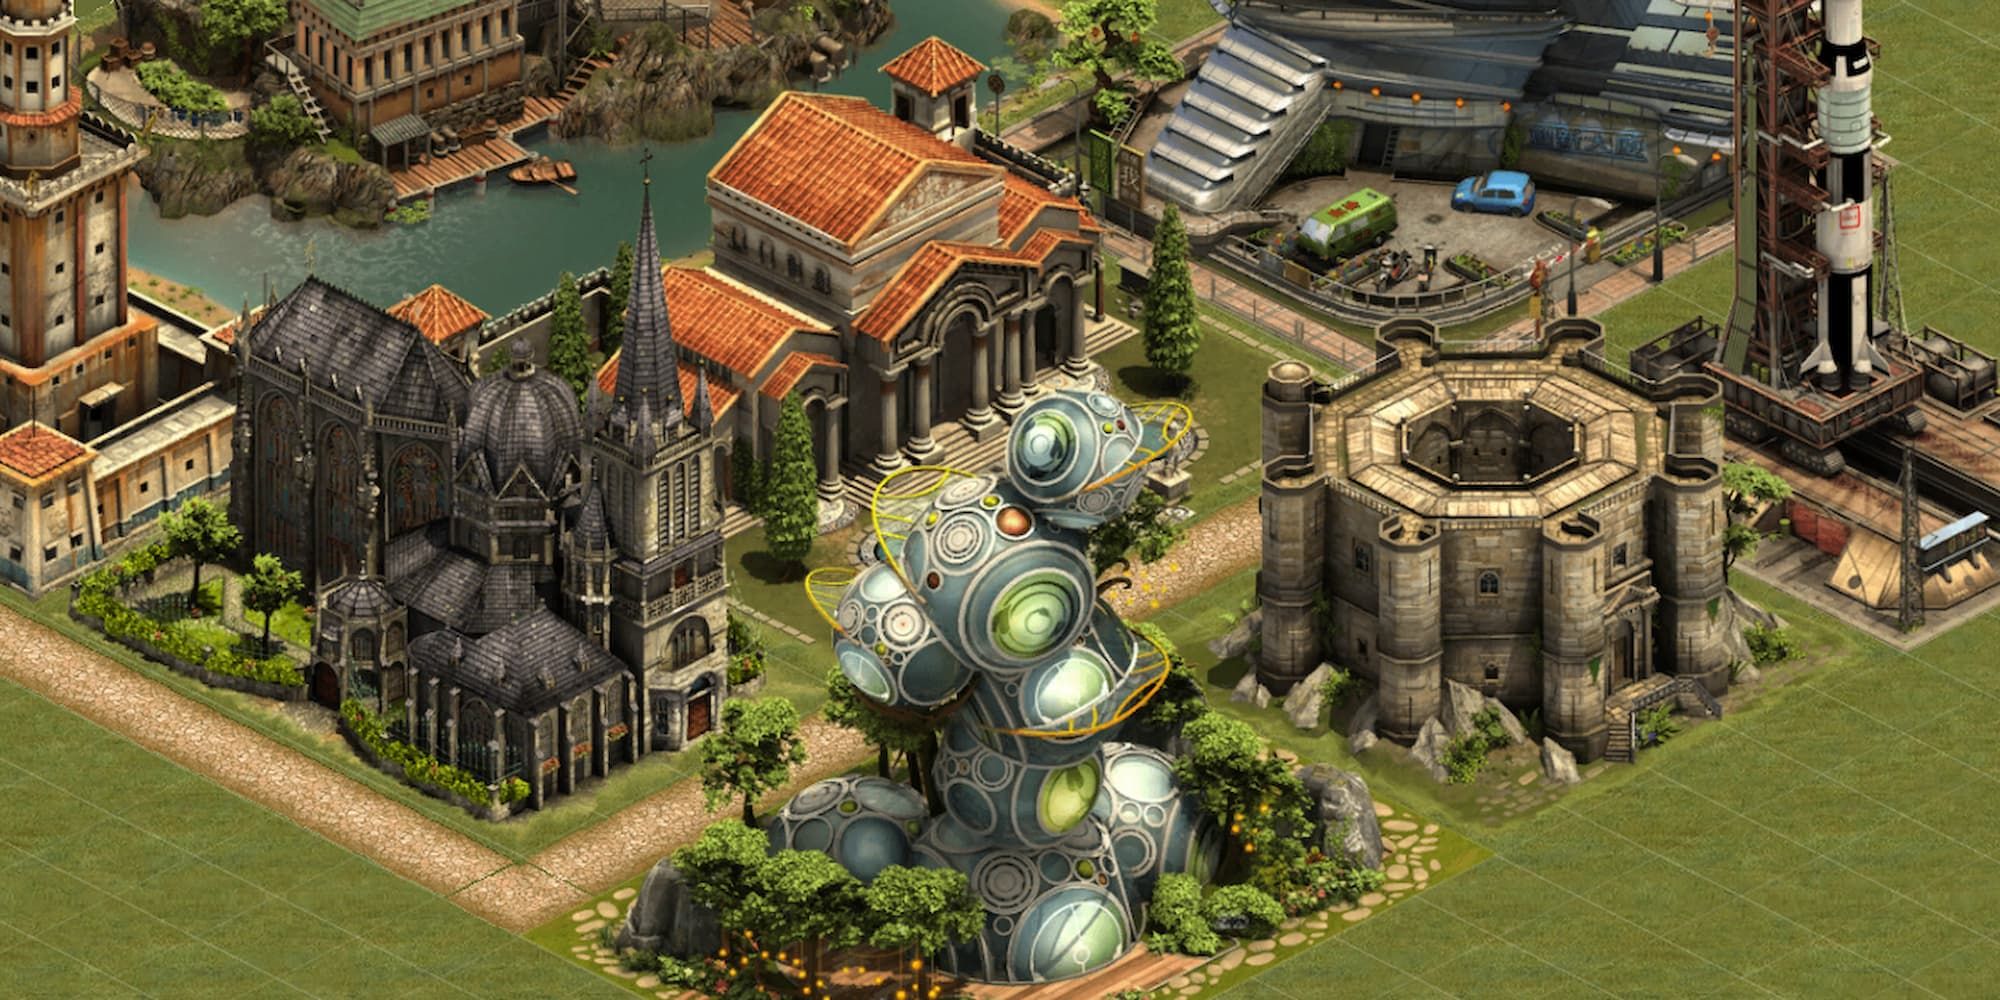 The kingdoms of Forge of Empires have magnificent buildings such as cathedrals and futuristic science buildings.